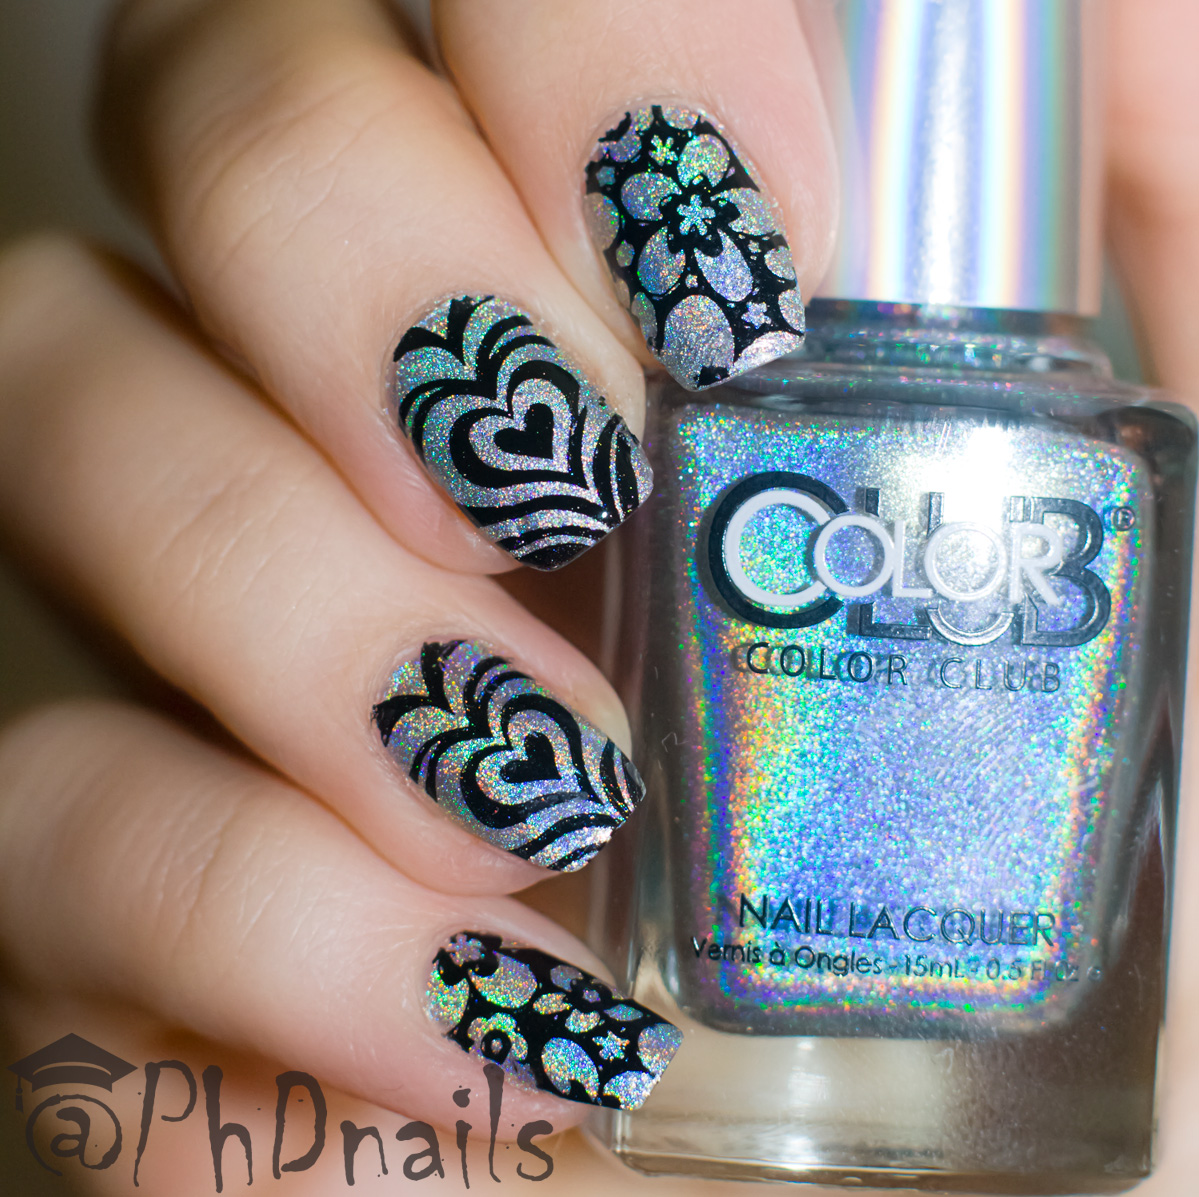 PhD nails: Color club Harp on it swatch and stamping nail art ...